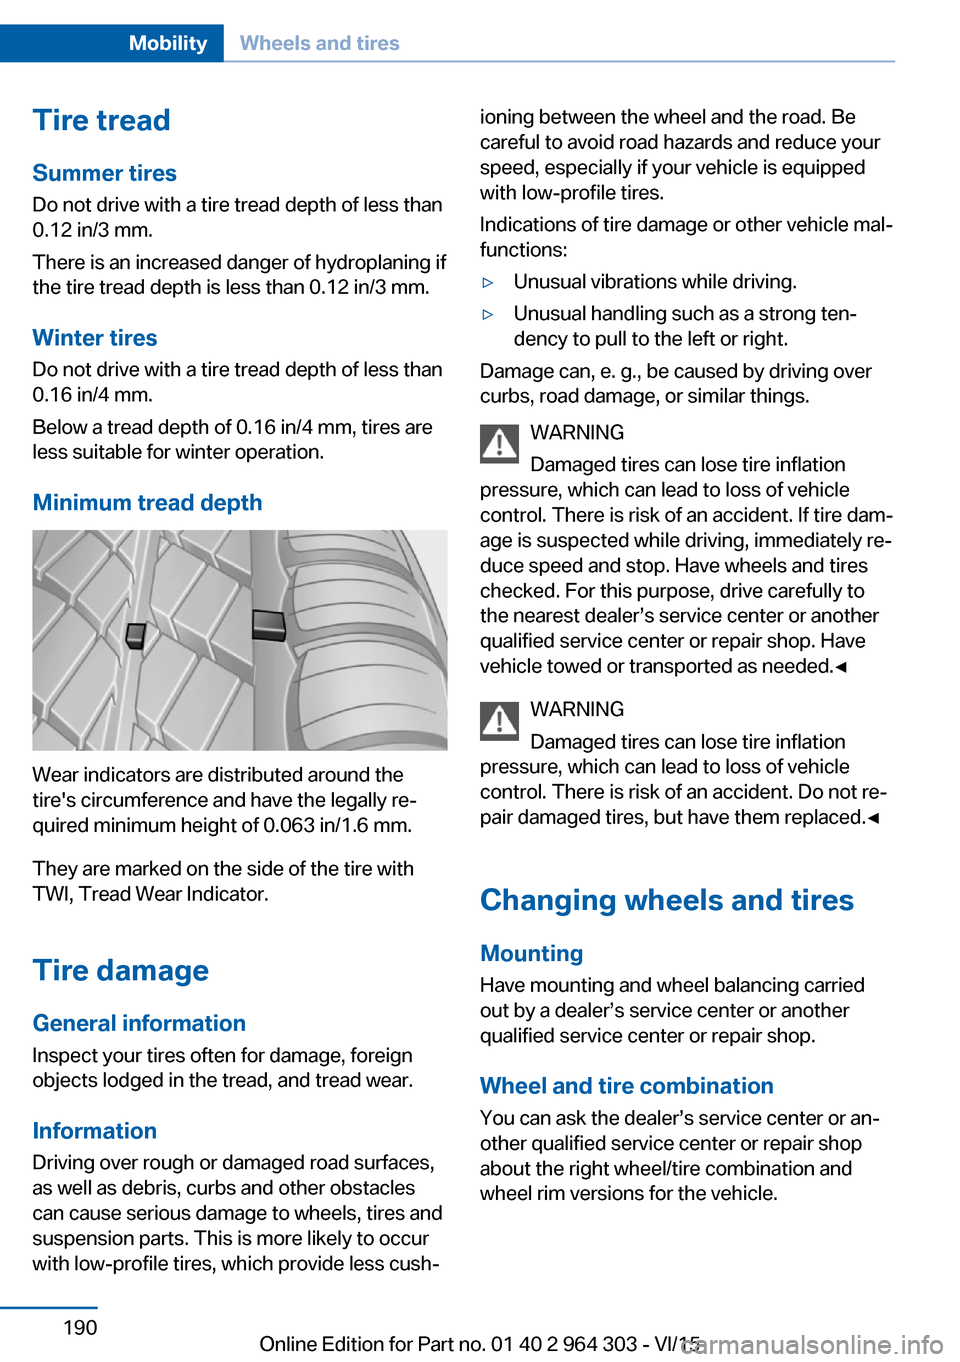 BMW X1 2016 F48 Owners Manual Tire treadSummer tires
Do not drive with a tire tread depth of less than
0.12 in/3 mm.
There is an increased danger of hydroplaning if
the tire tread depth is less than 0.12 in/3 mm.
Winter tires
Do n